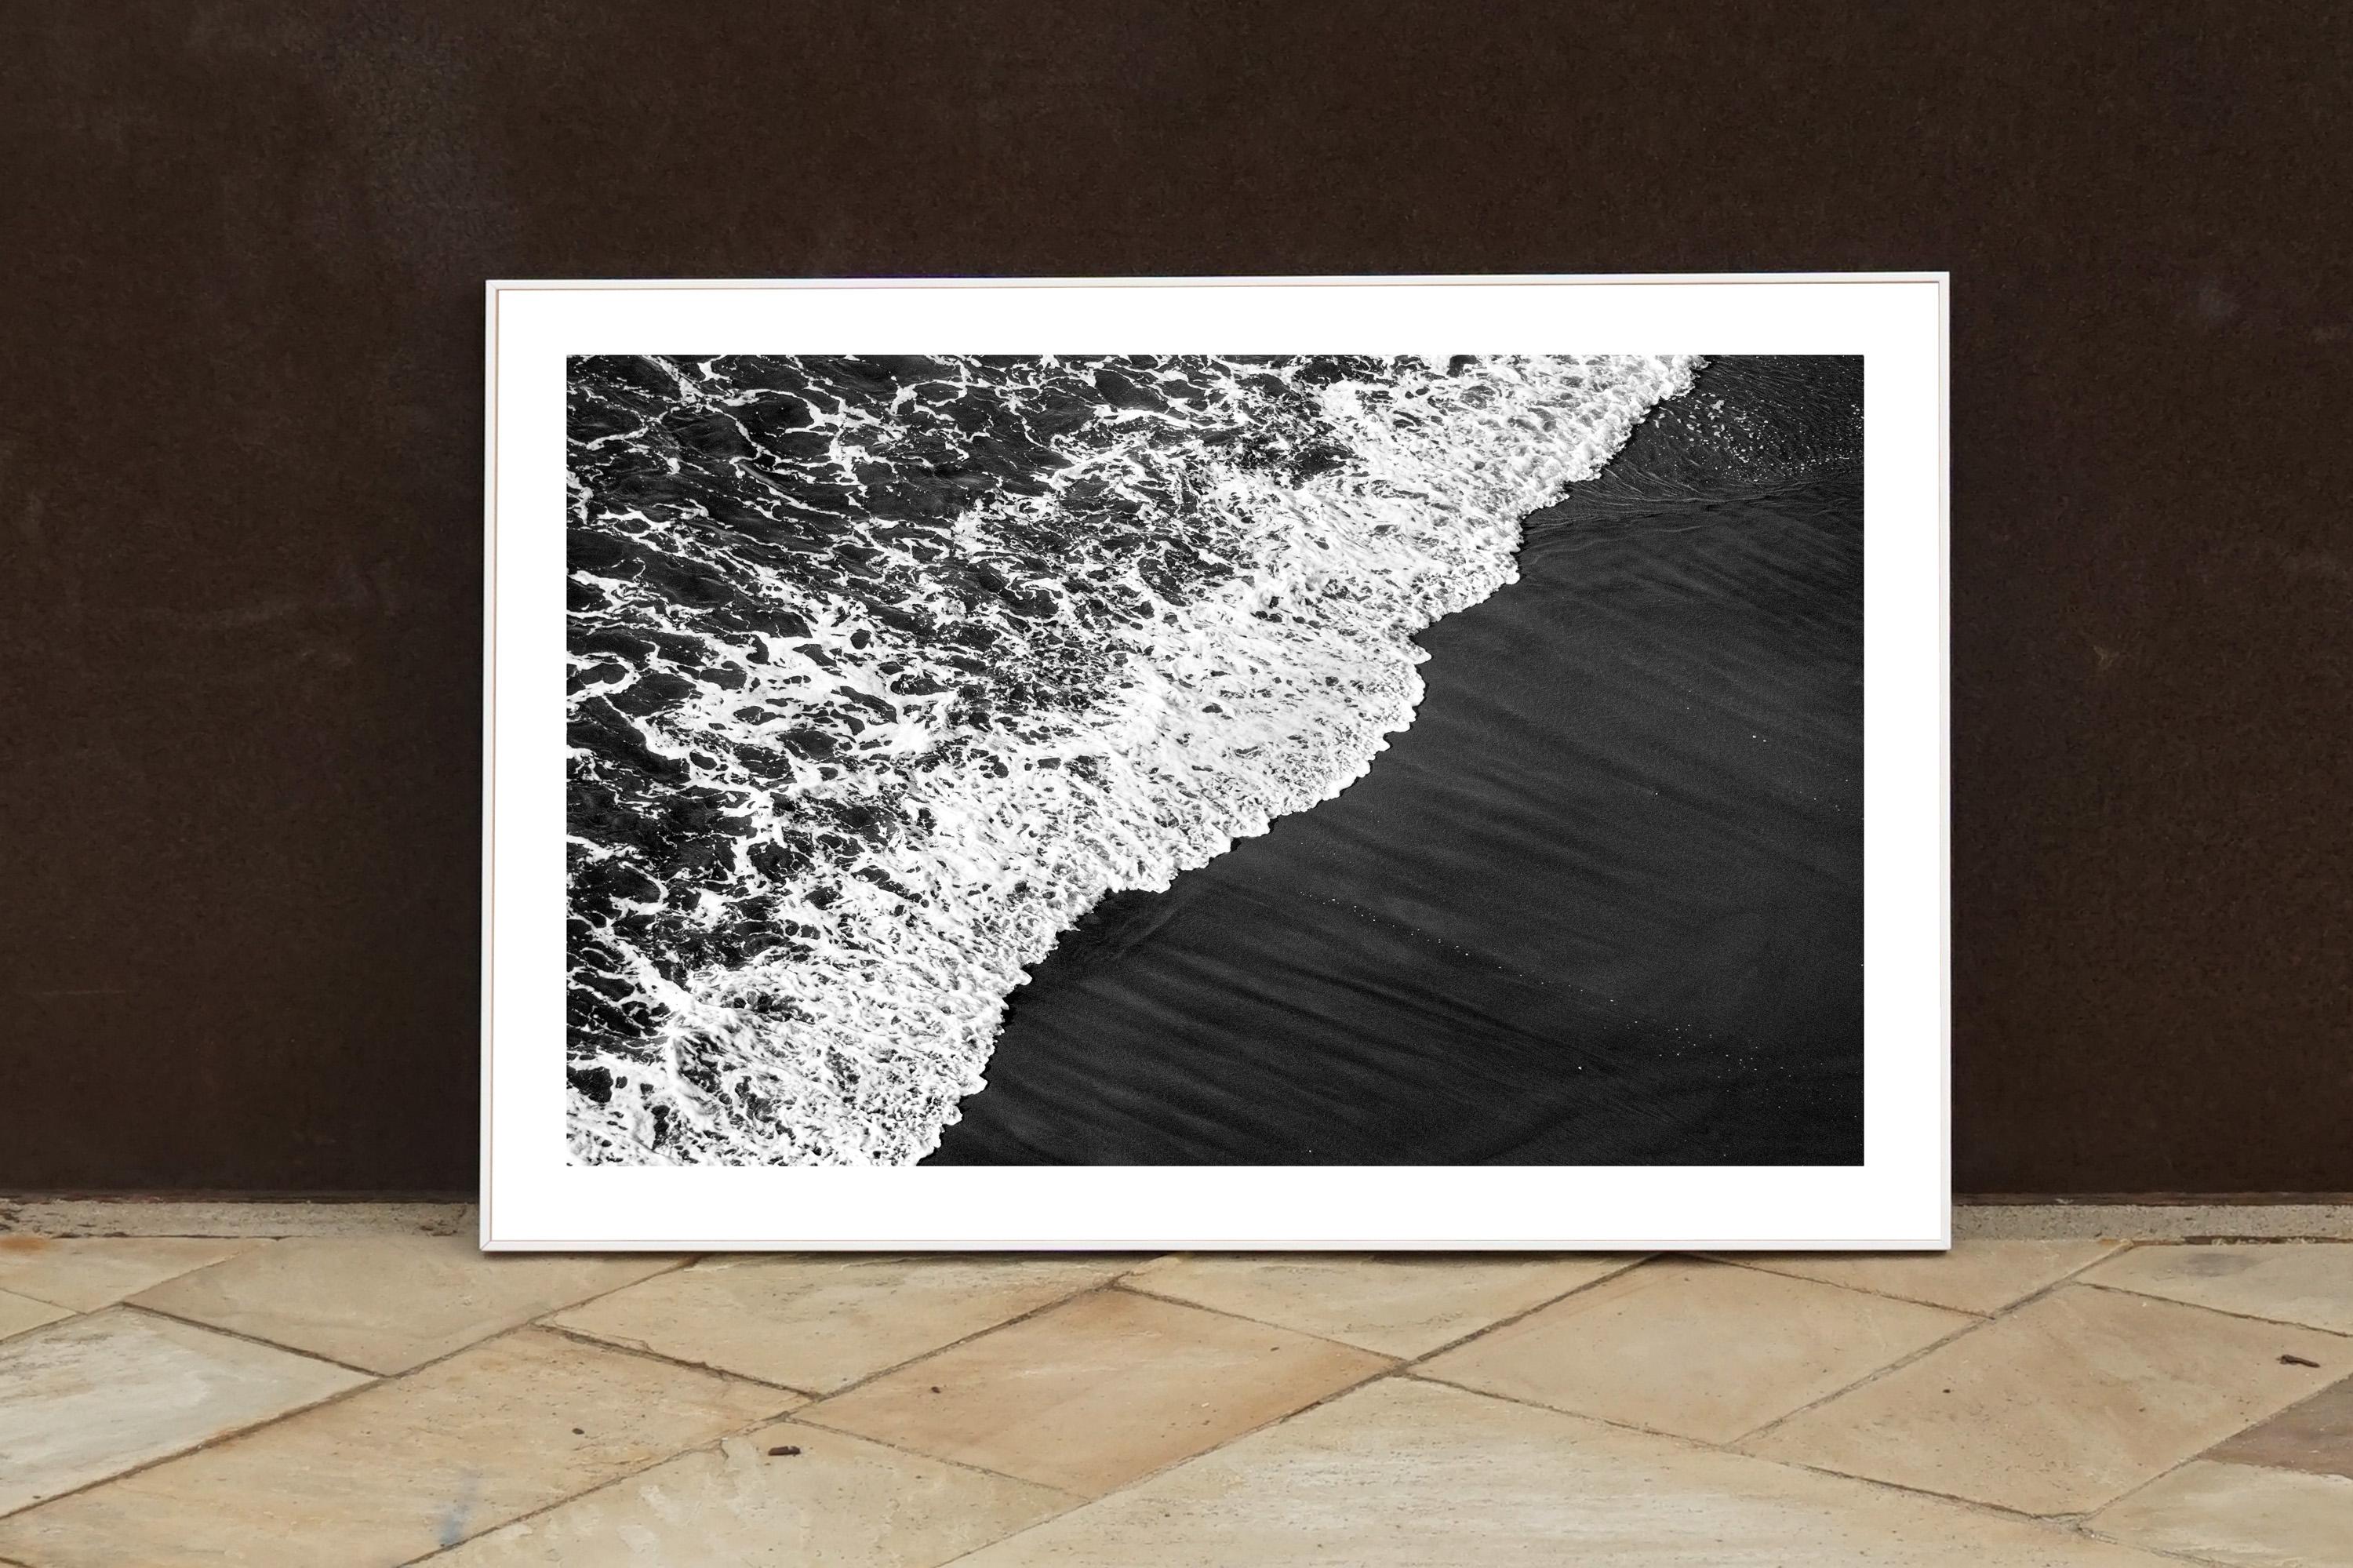 This is an exclusive limited edition black and white giclée print, on 100% cotton Hahnemühle Photo Rag Fine Art matte paper.

This series of black and white photographs captures the raw power and beauty of the ocean and other bodies of water. The